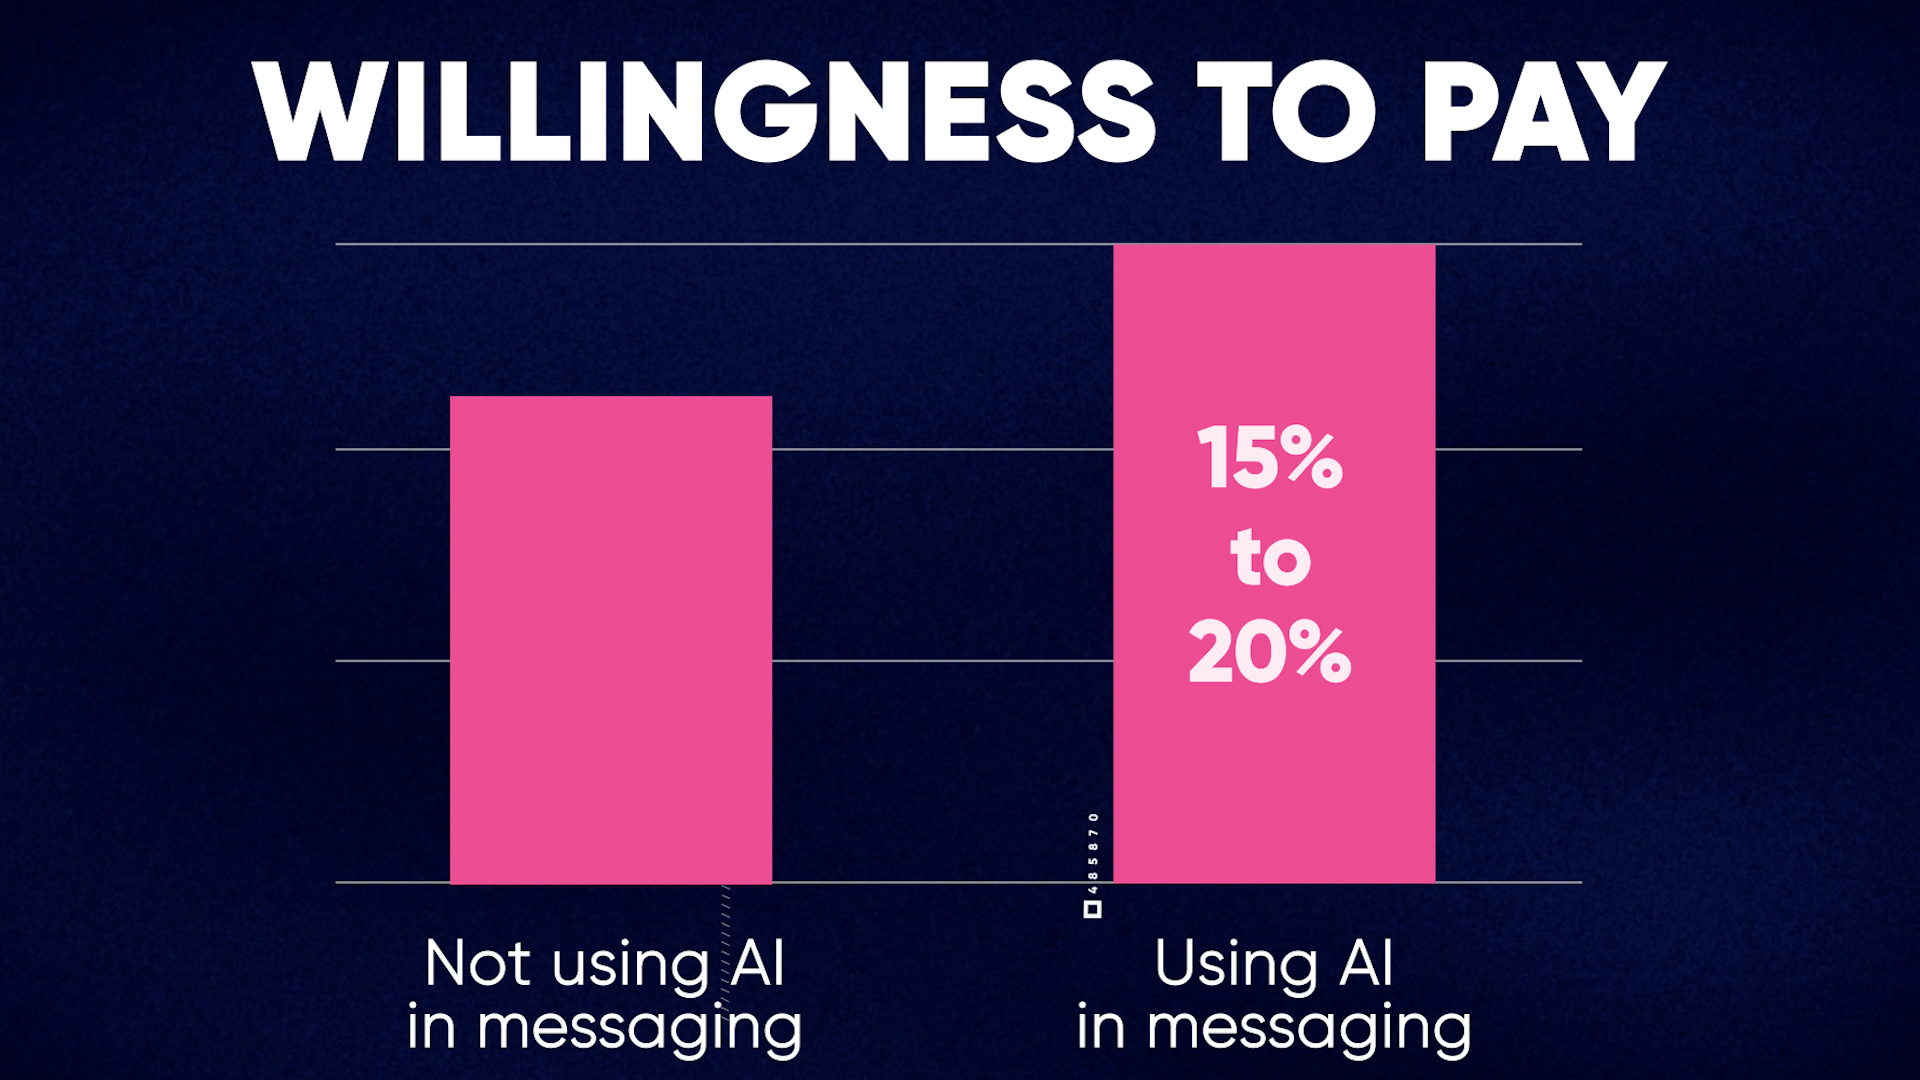 Willingness to pay 15% to 20% higher using AI in messaging